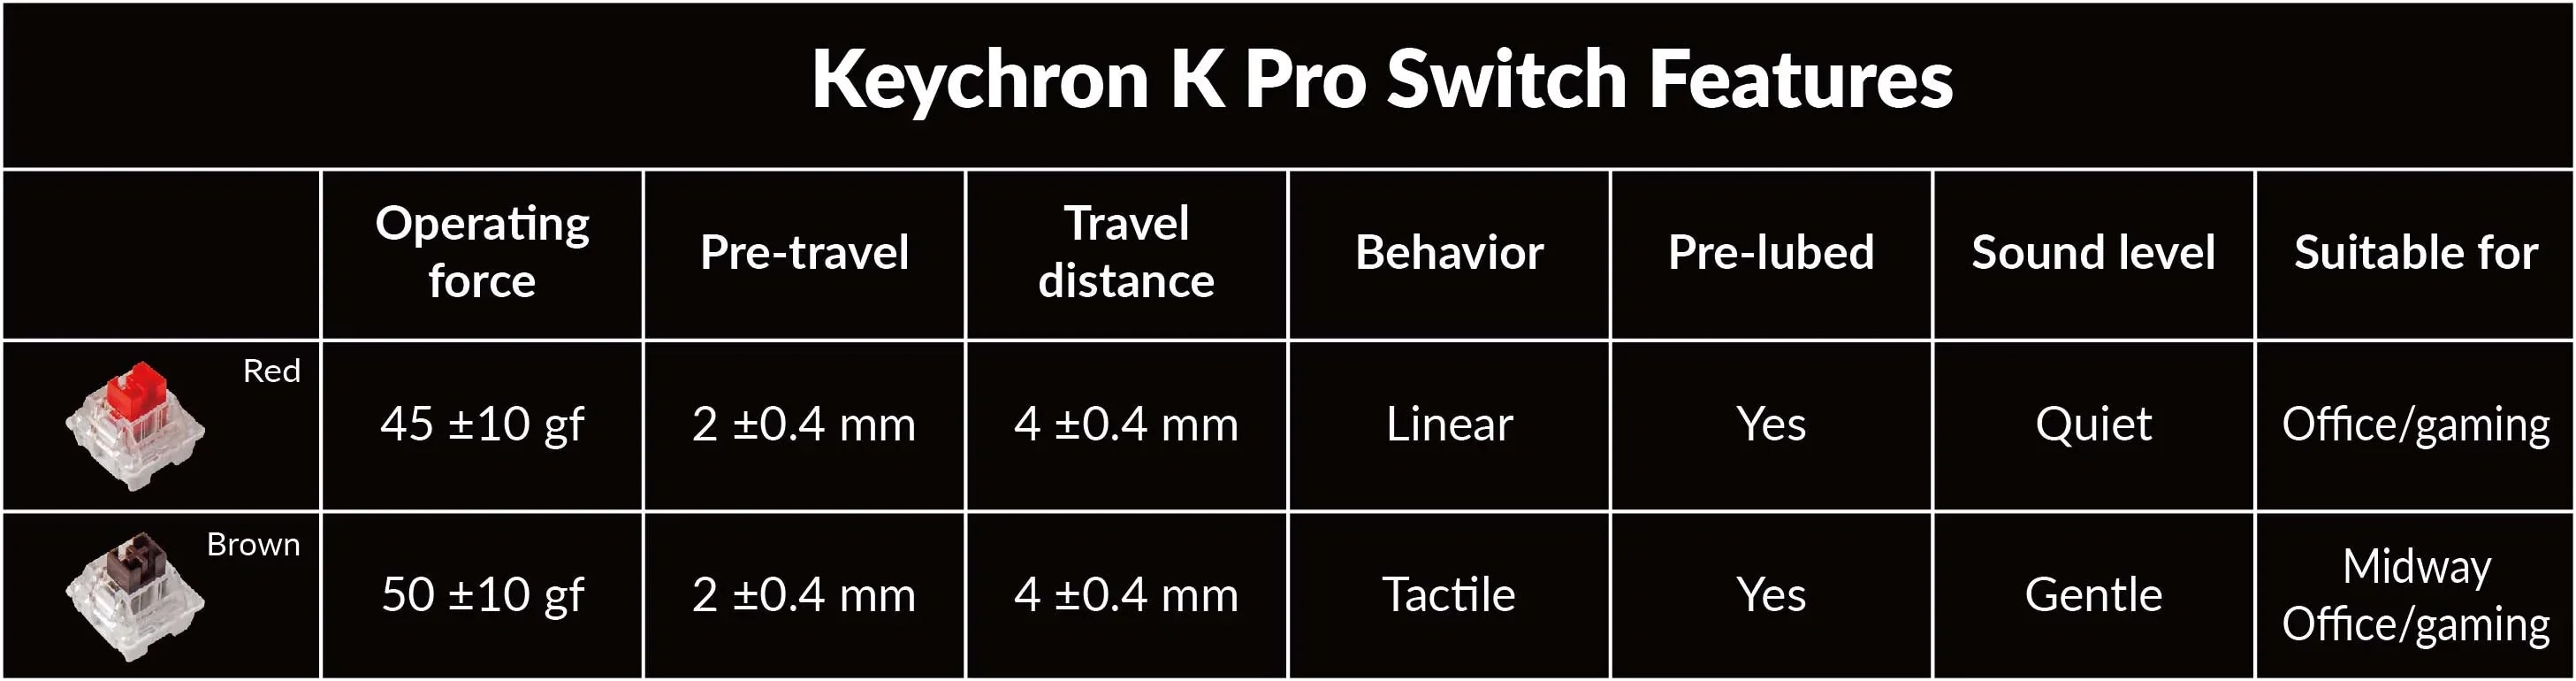 Keychron K Pro mechanical switch features